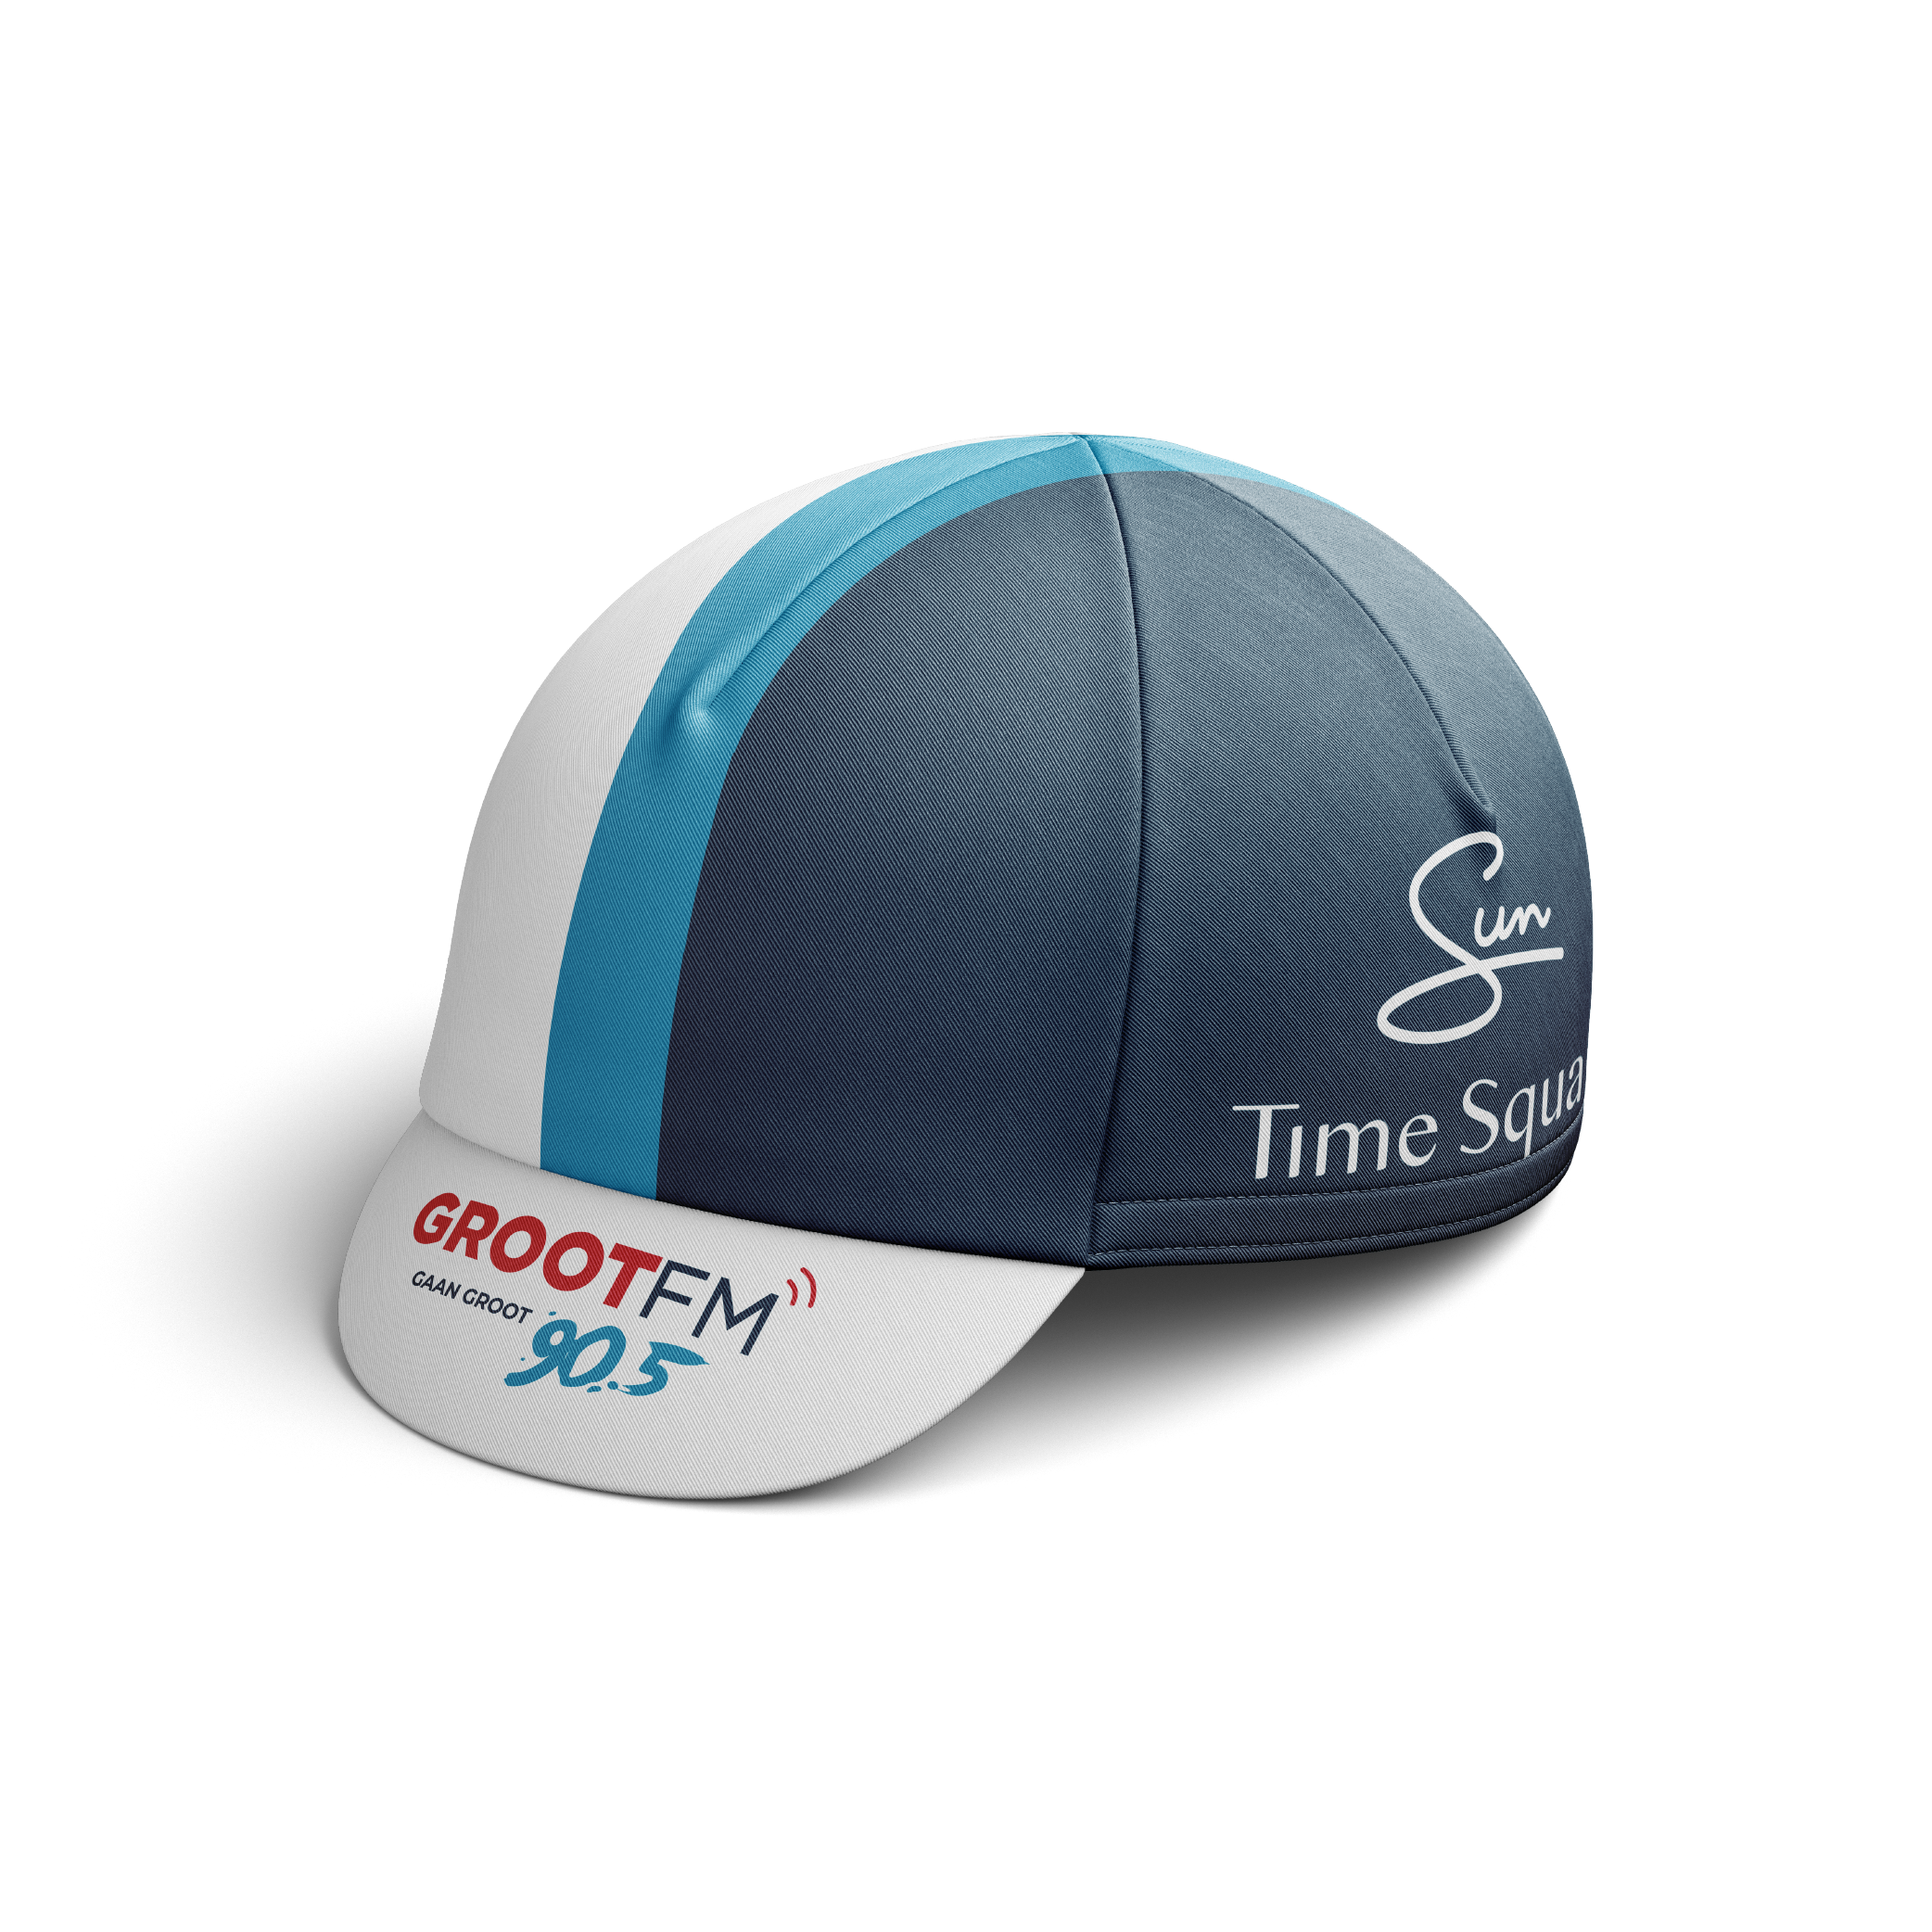 Die Everest Wealth Groot Trap Cycling Cap Vento